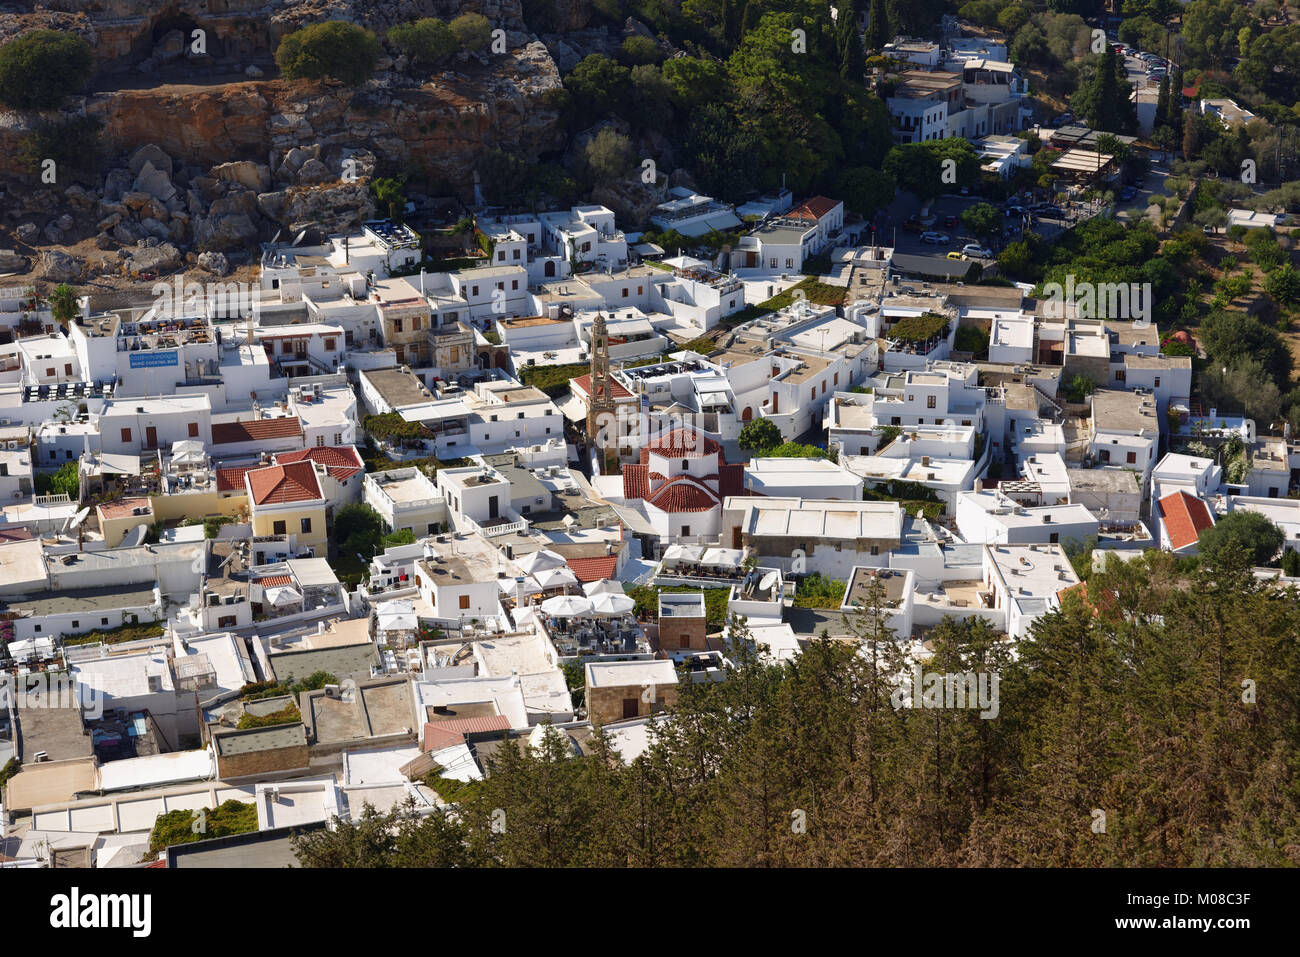 Lindos, Greece - October 11, 2017: Aerial view of Lindos from Acropolis. Located 50 km south of the town of Rhodes, Lindos is a popular tourist and ho Stock Photo